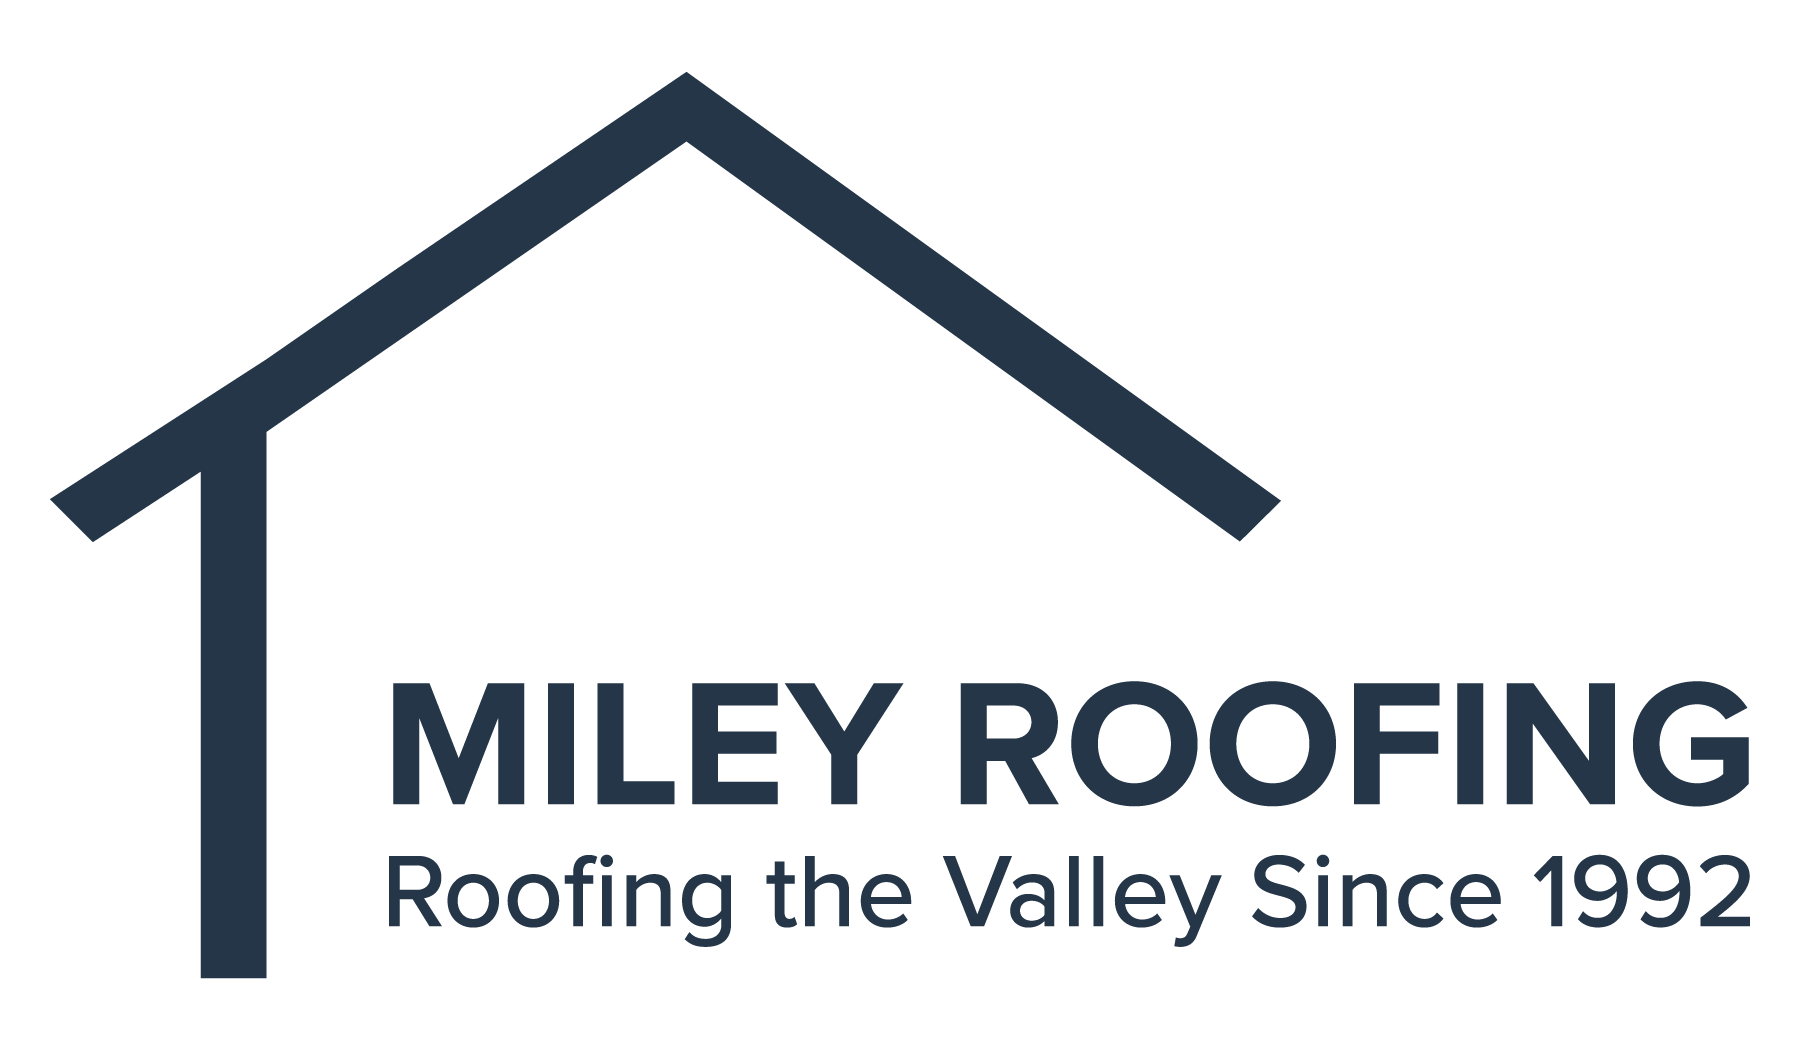 Miley Roofing